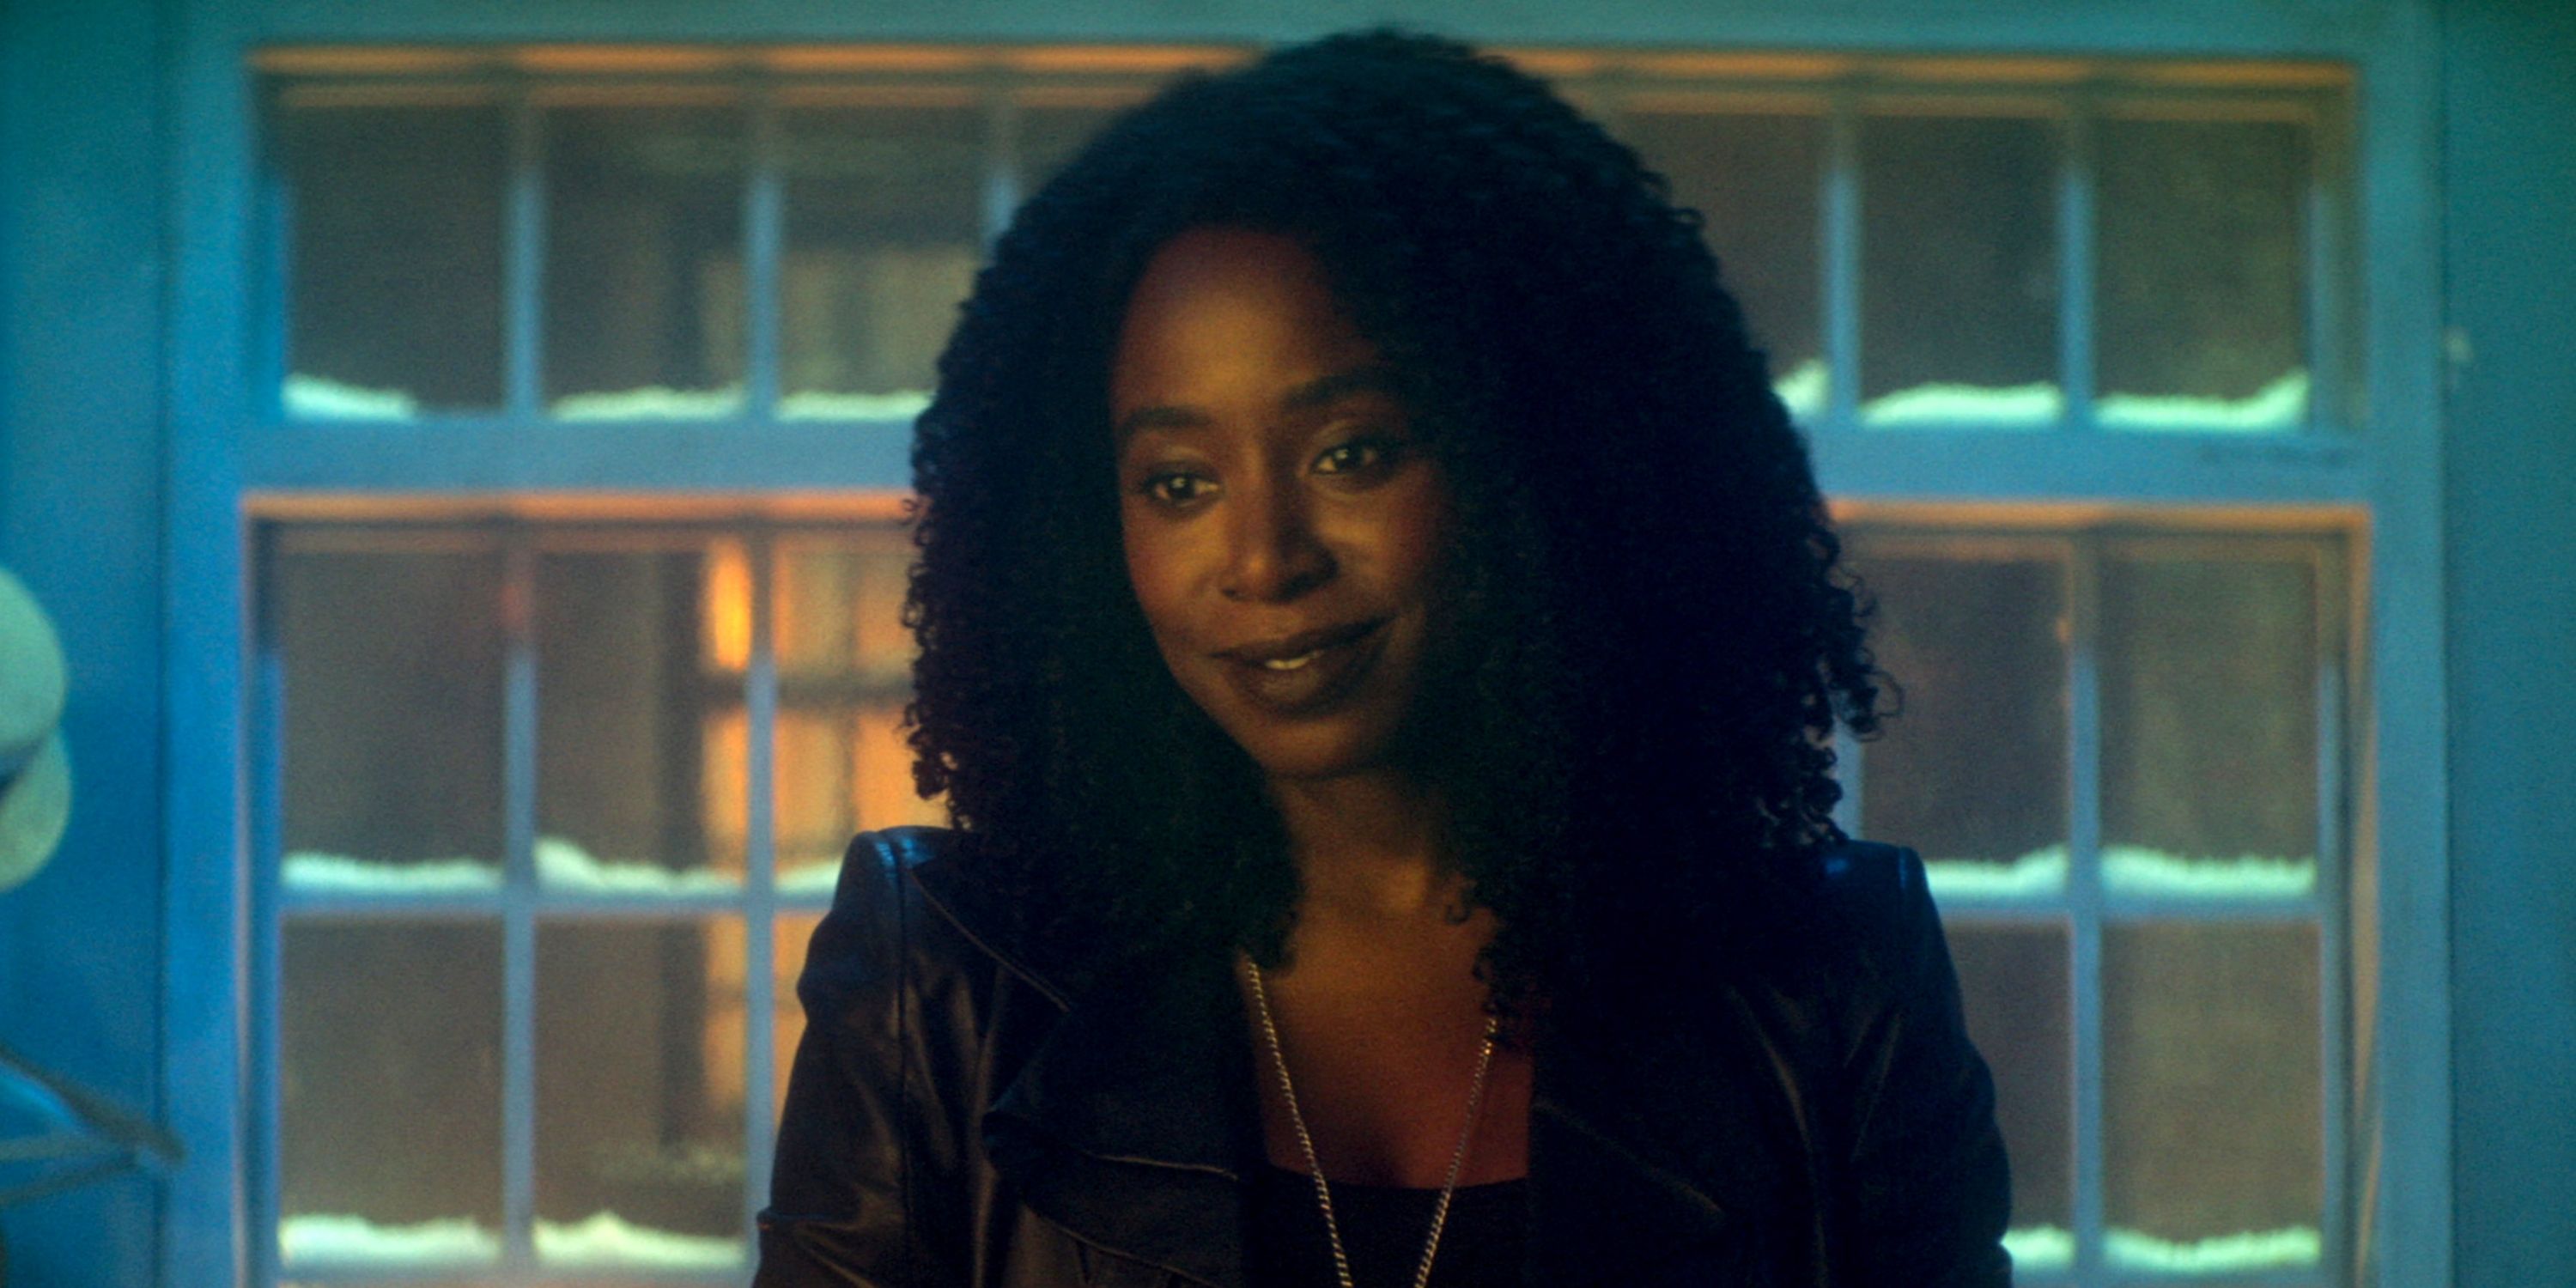 Kirby Howell-Baptiste as Death smiling in Episode 1 of Season 1 of Dead Boy Detectives